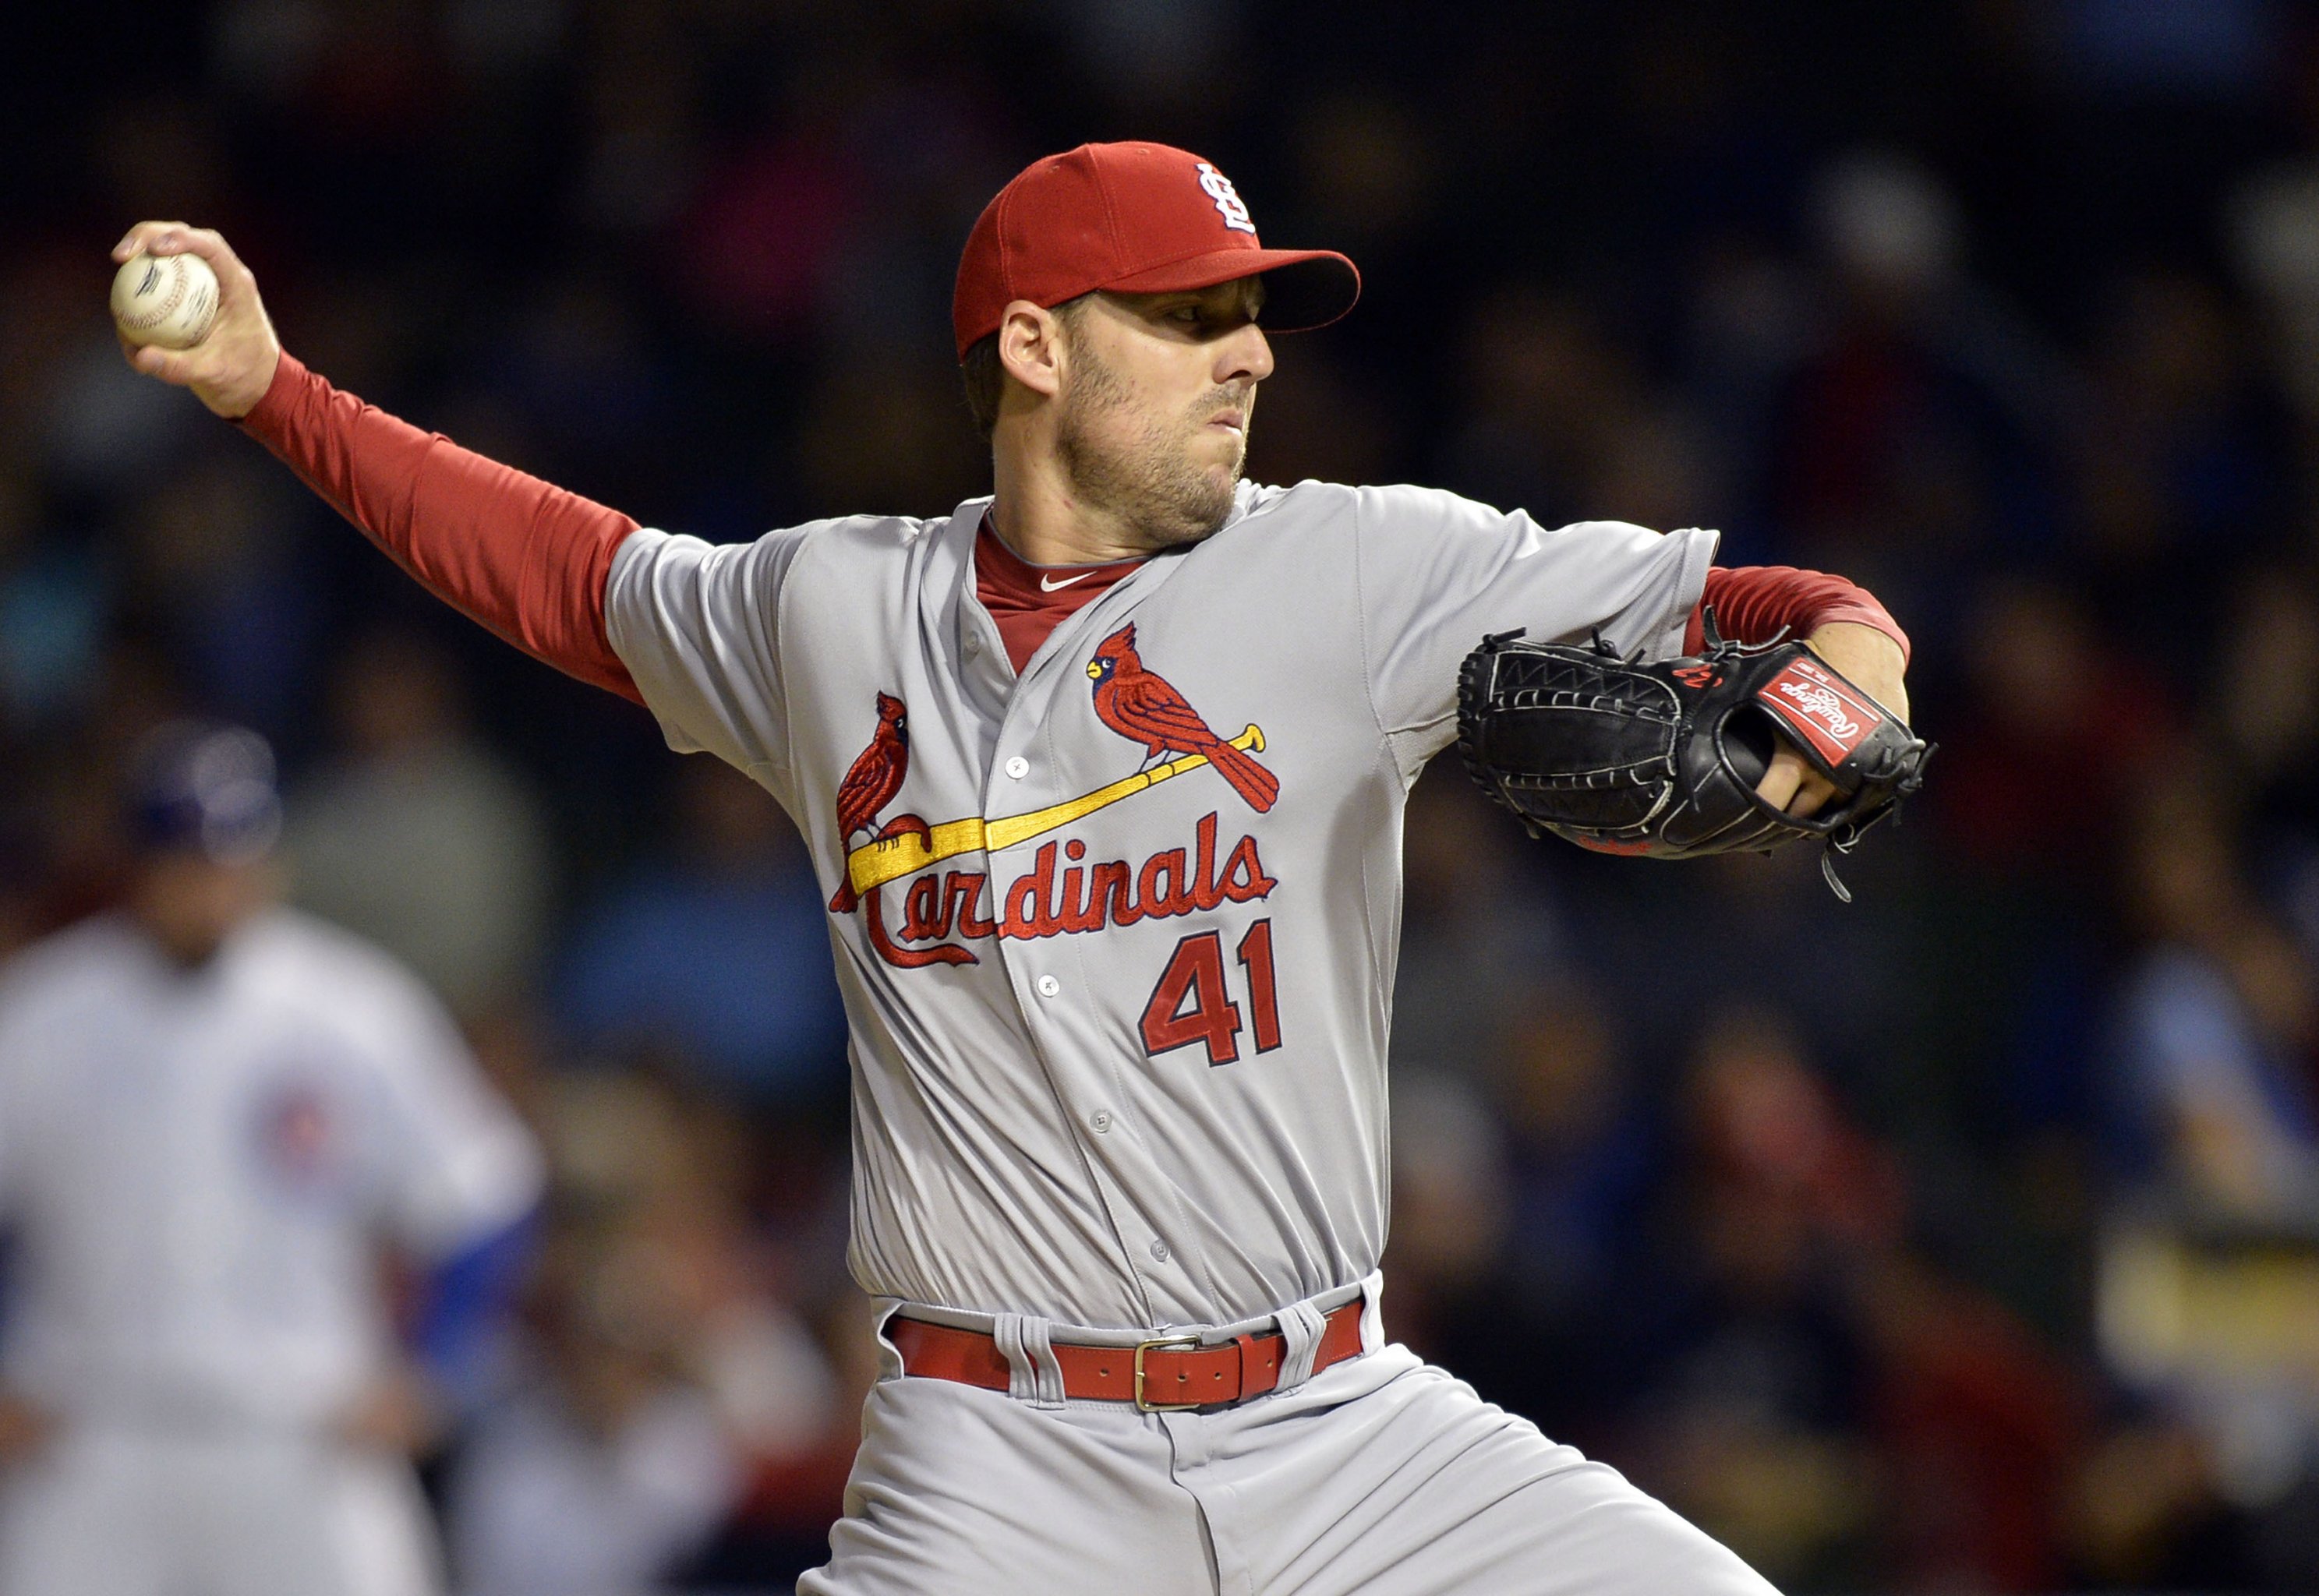 Cardinals 1, Dodgers 0: Rookie Wacha bests Kershaw for a 2-0 lead